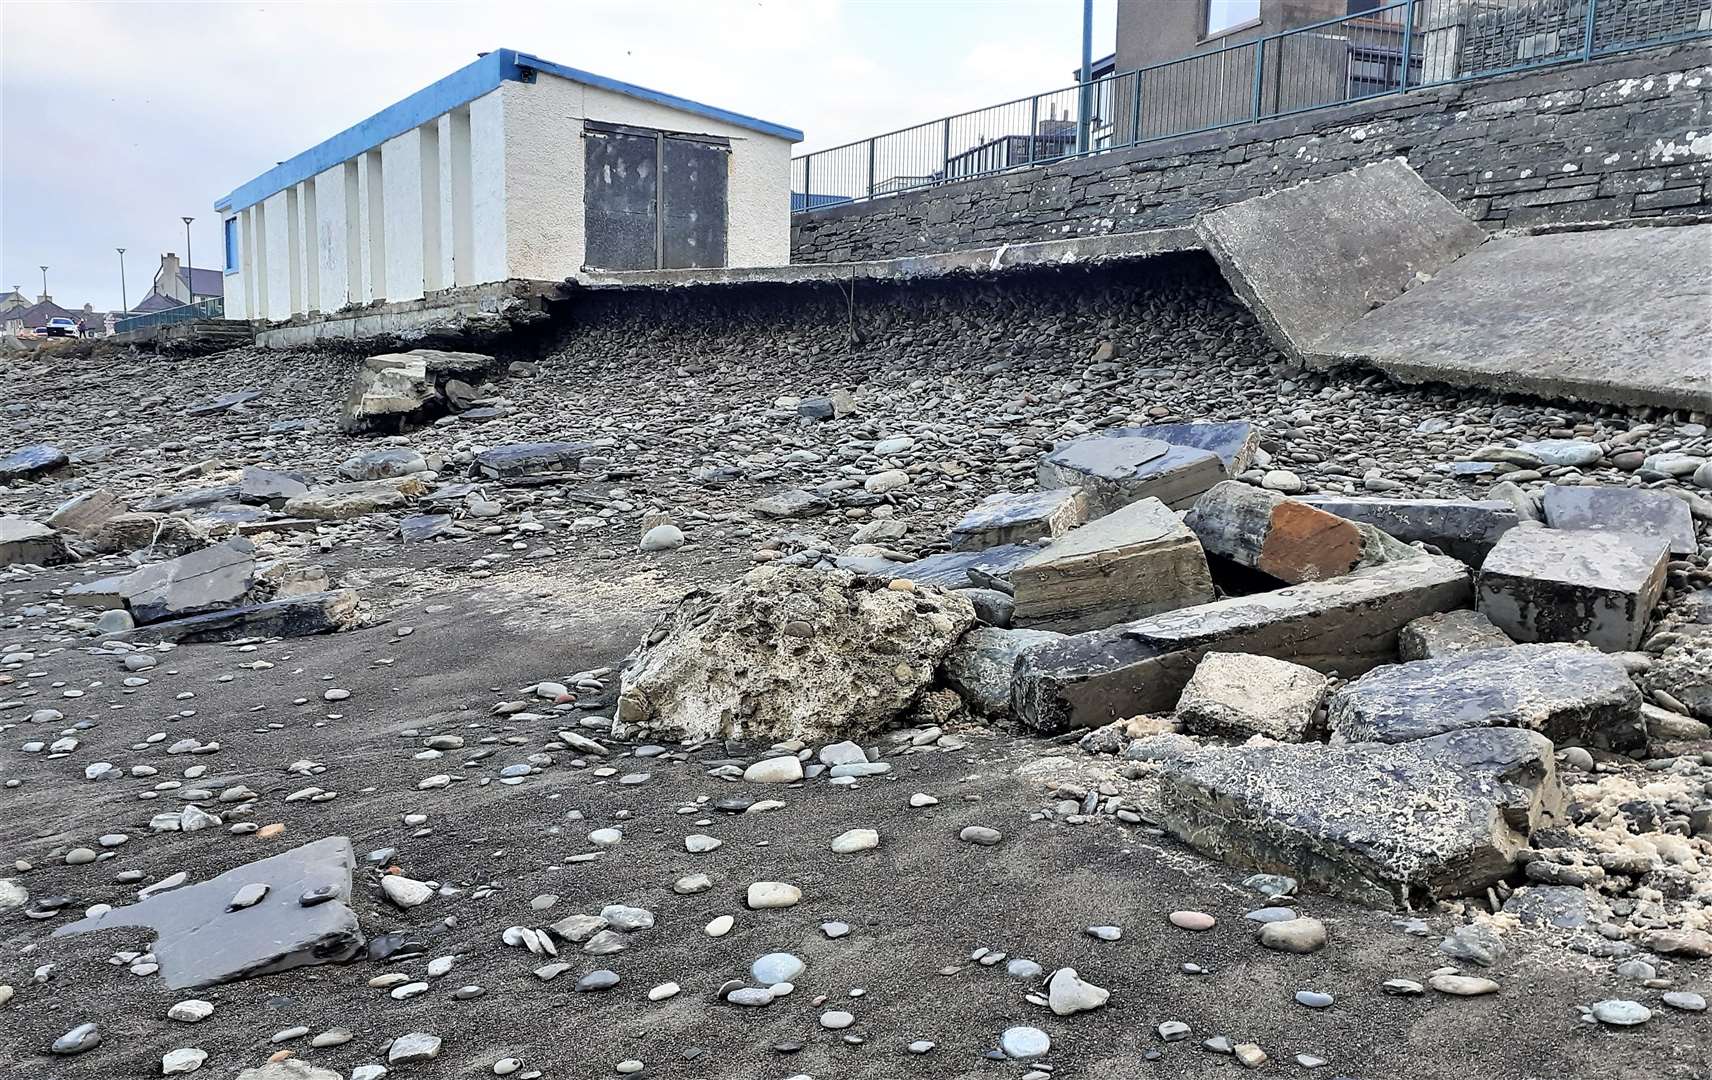 This image by Alexander Glasgow clearly shows how serious the erosion has been at the site.